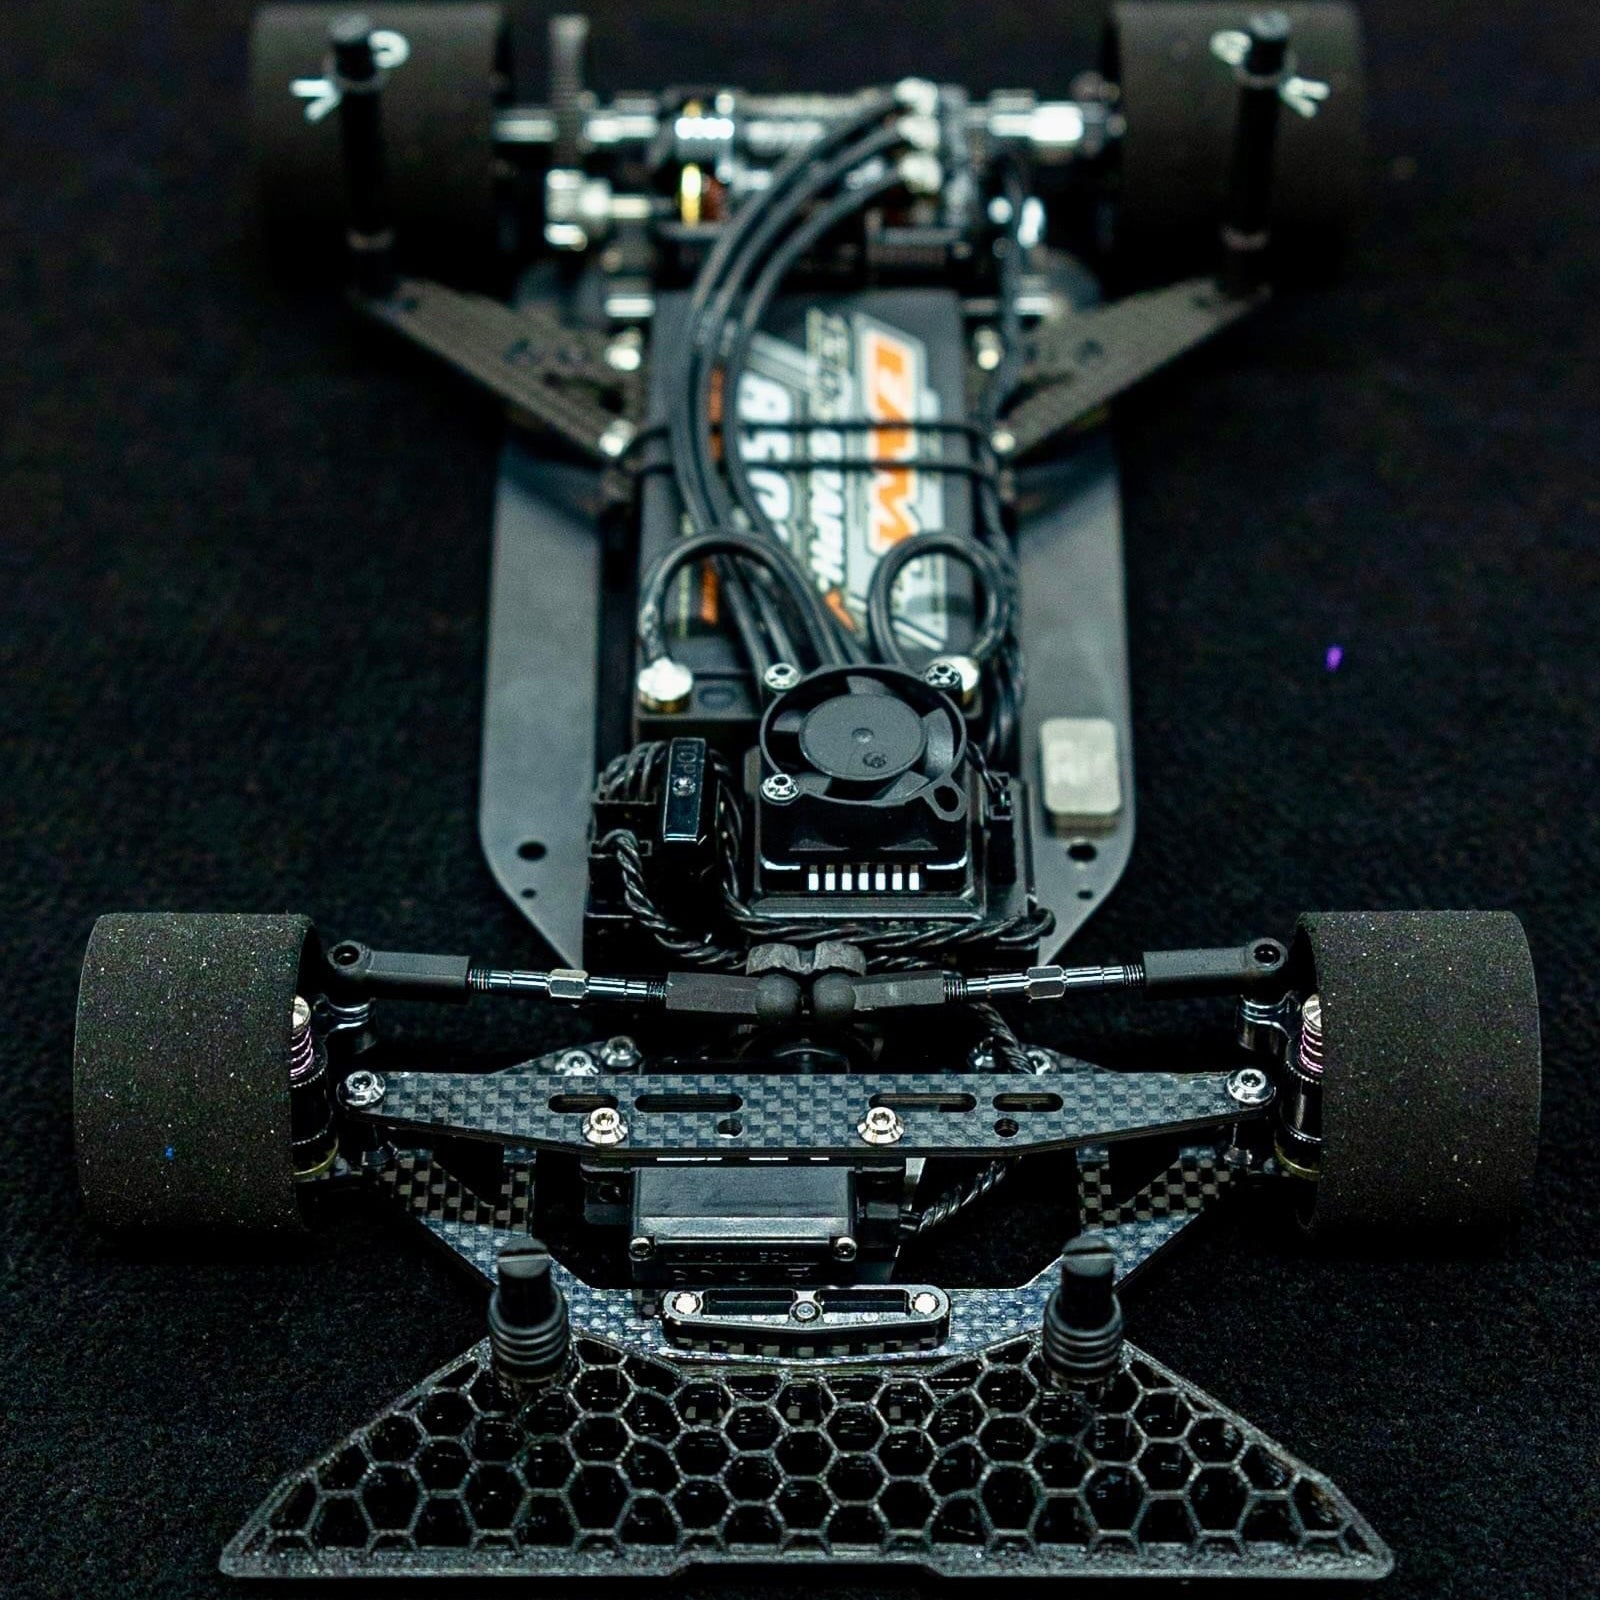 Kemp Anderson’s Round 1 TQ 1up Equipped Awesomatix A12